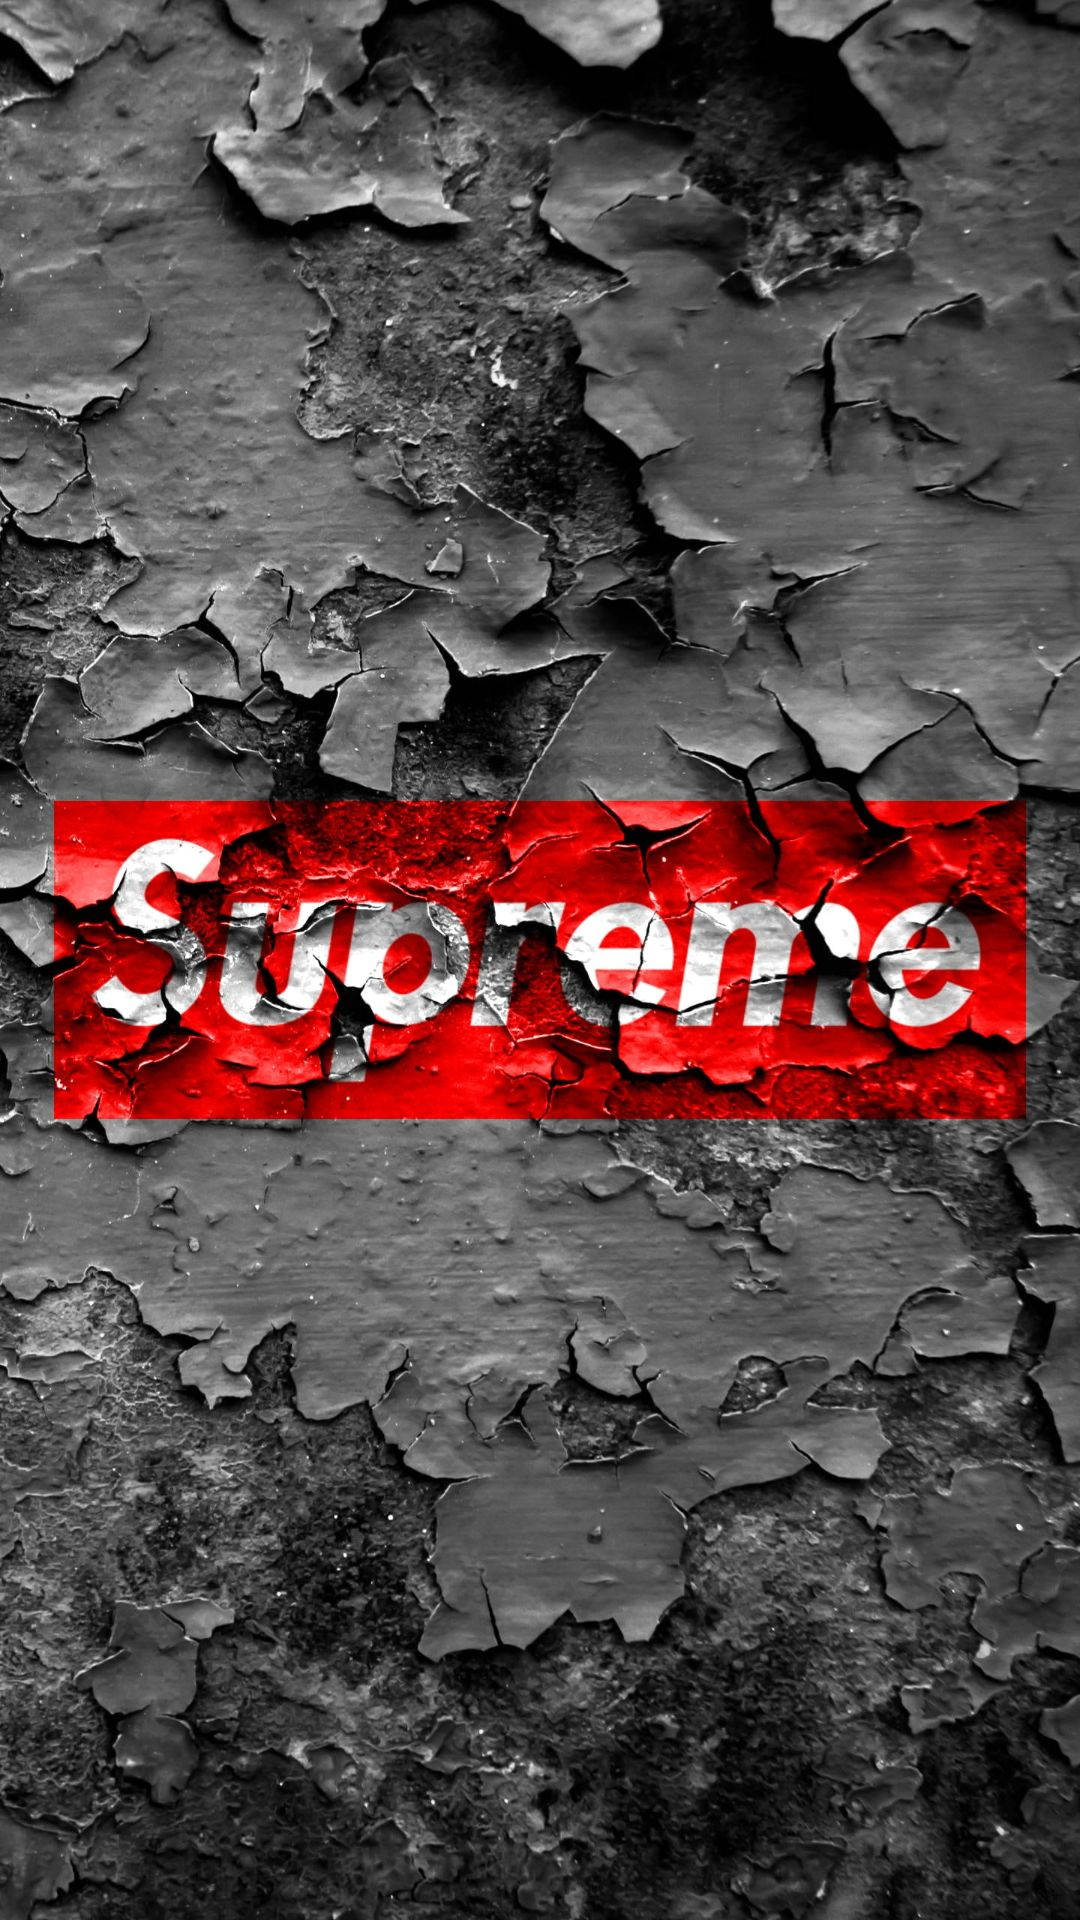 Cool Supreme Chipped Paint Wallpaper